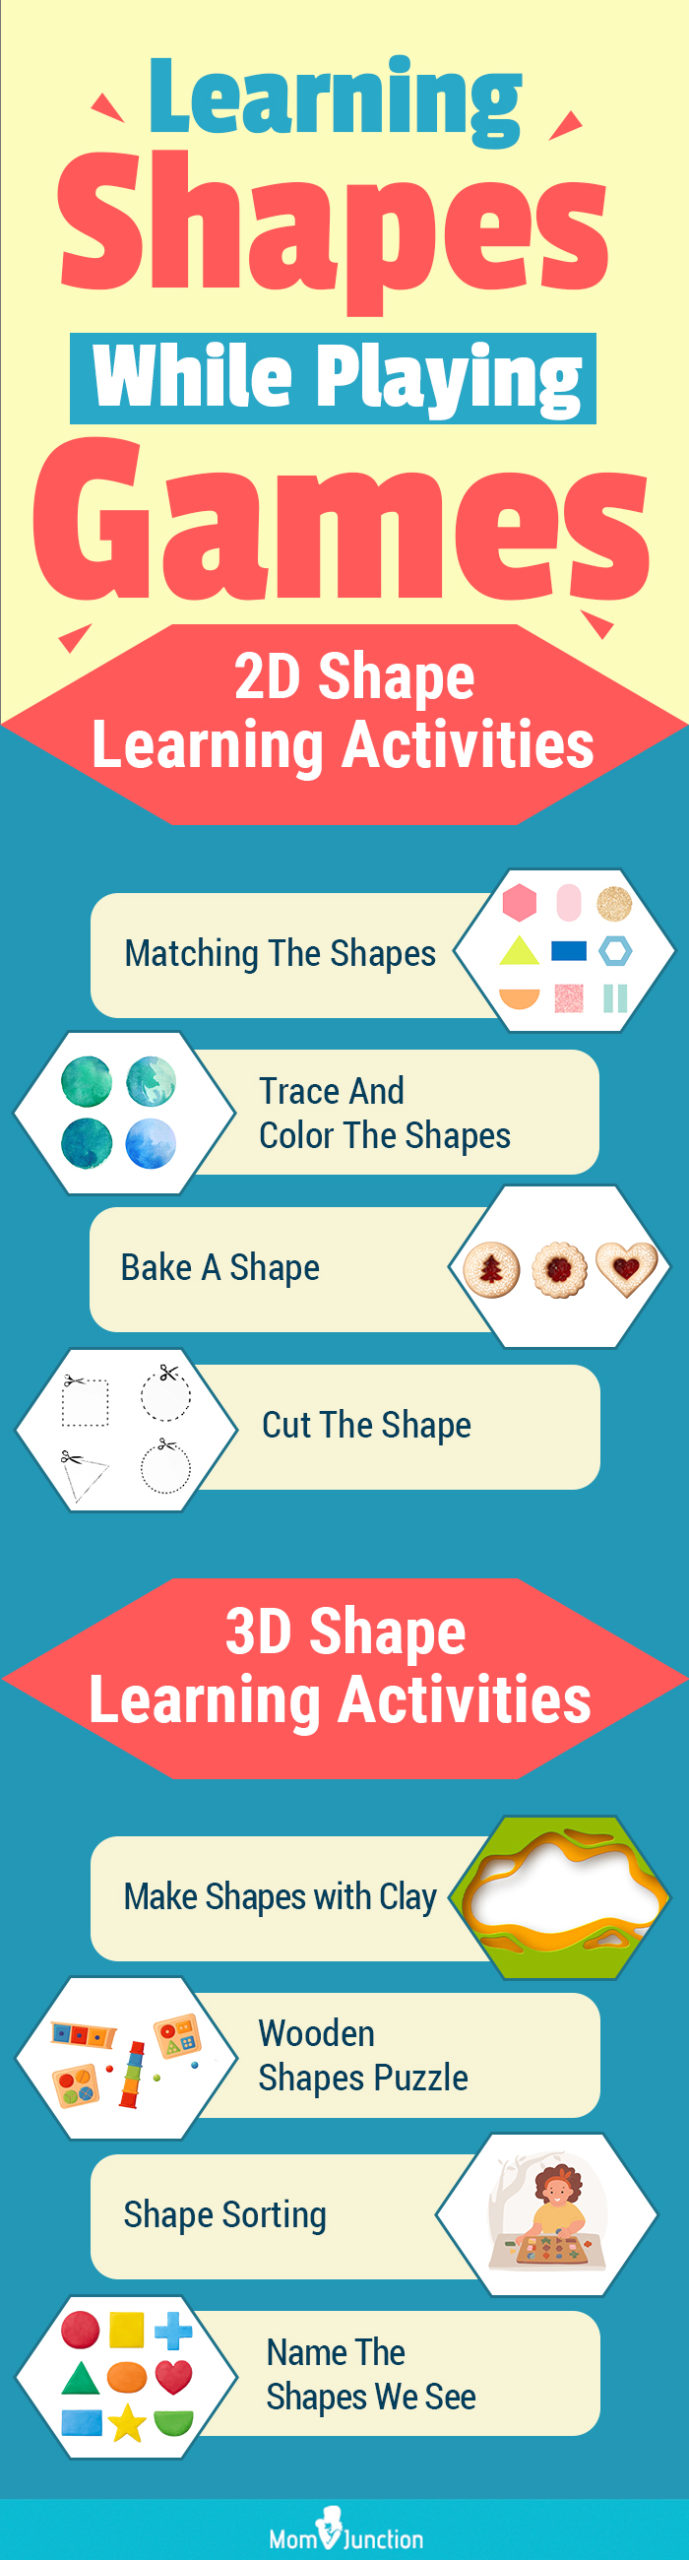 learning shapes while playing games [infographic]